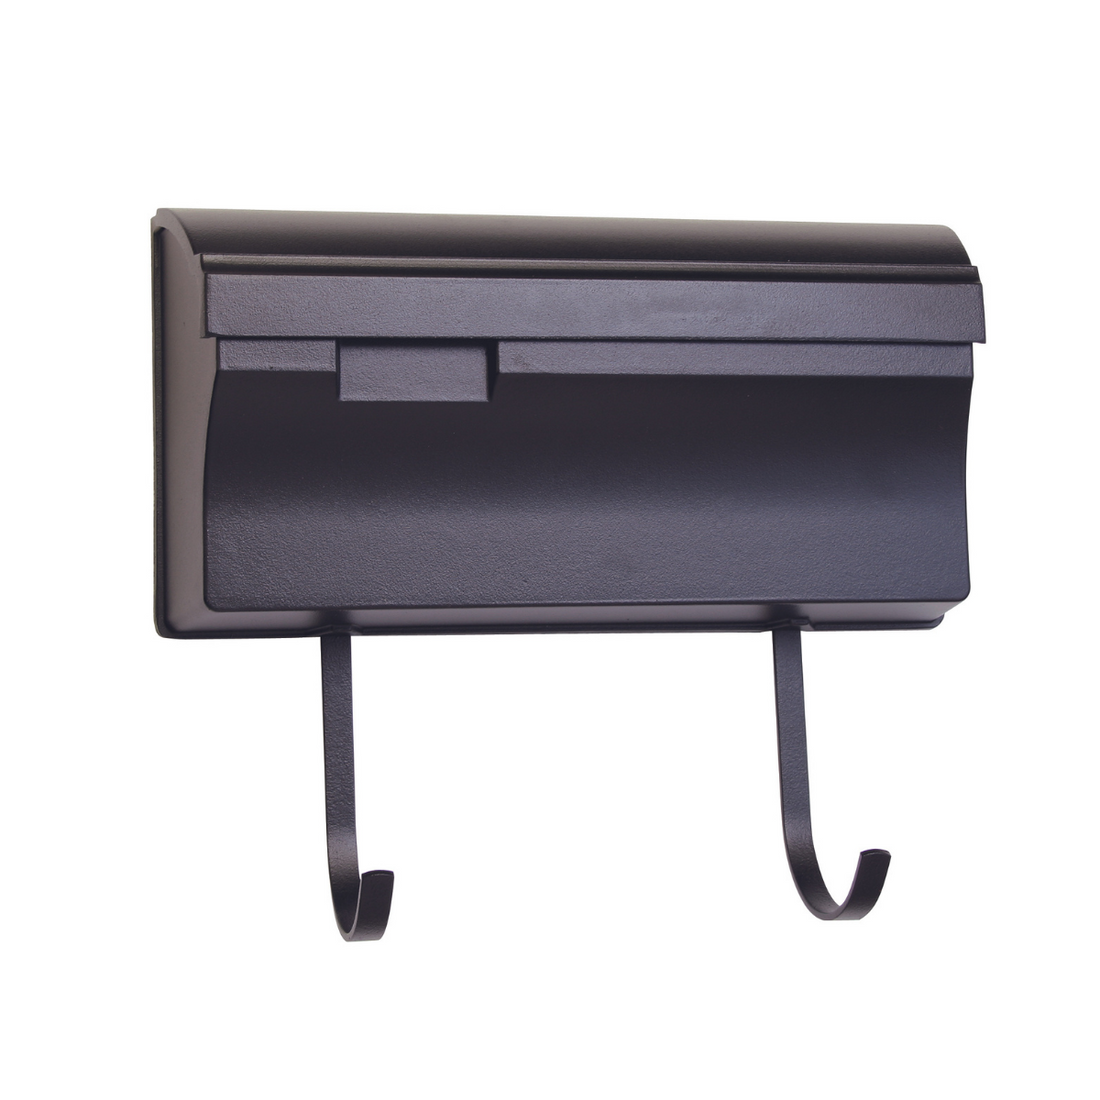 Vintage - Horizontal letterbox with hook - 71041